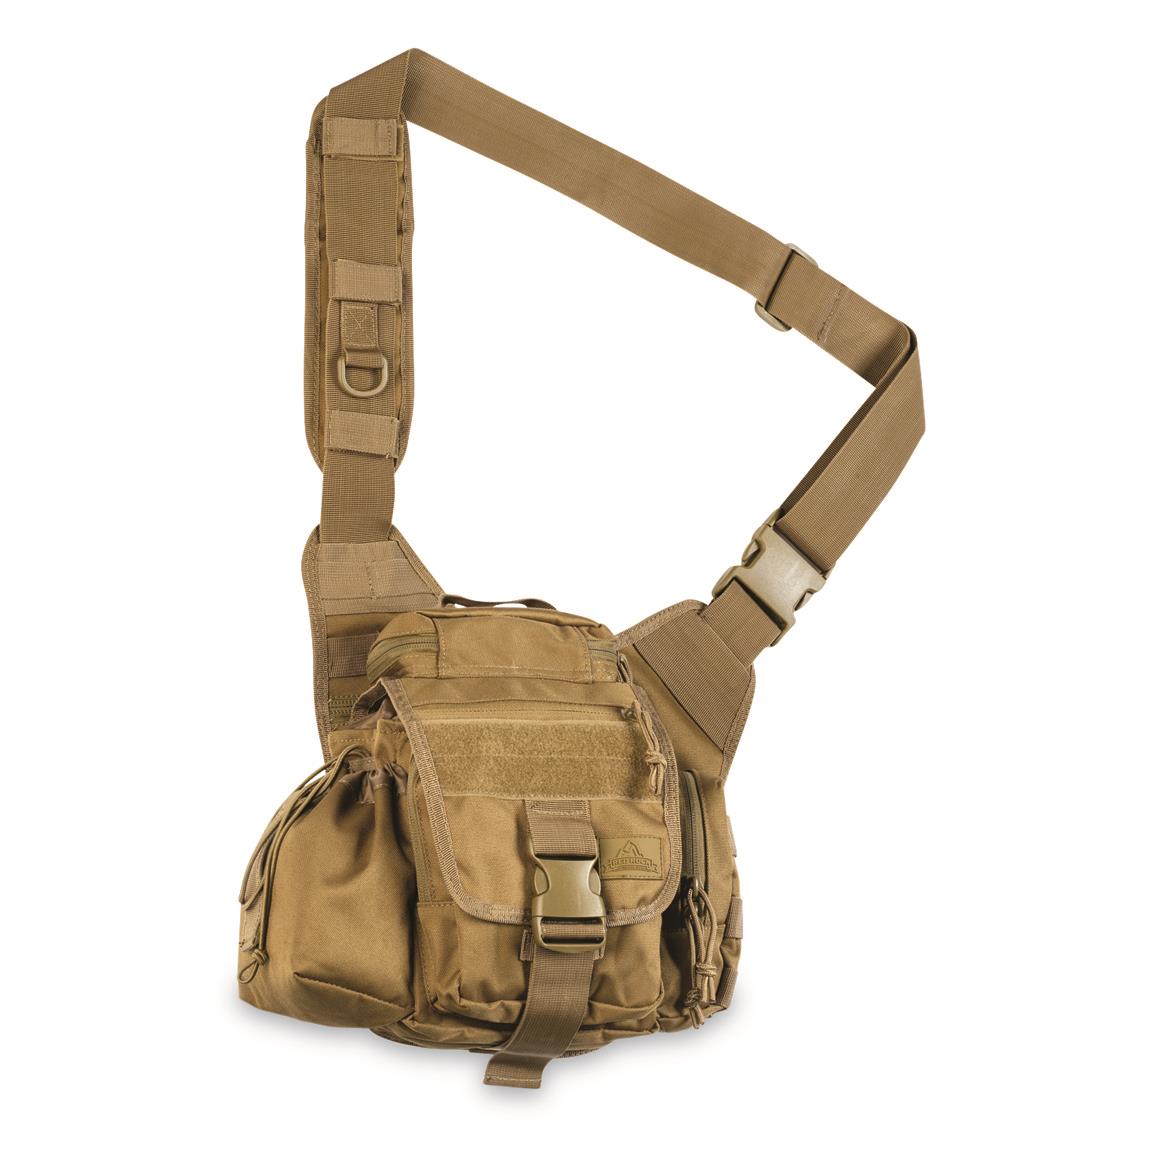 Red Rock Outdoor Gear Hipster Sling Bag, Coyote